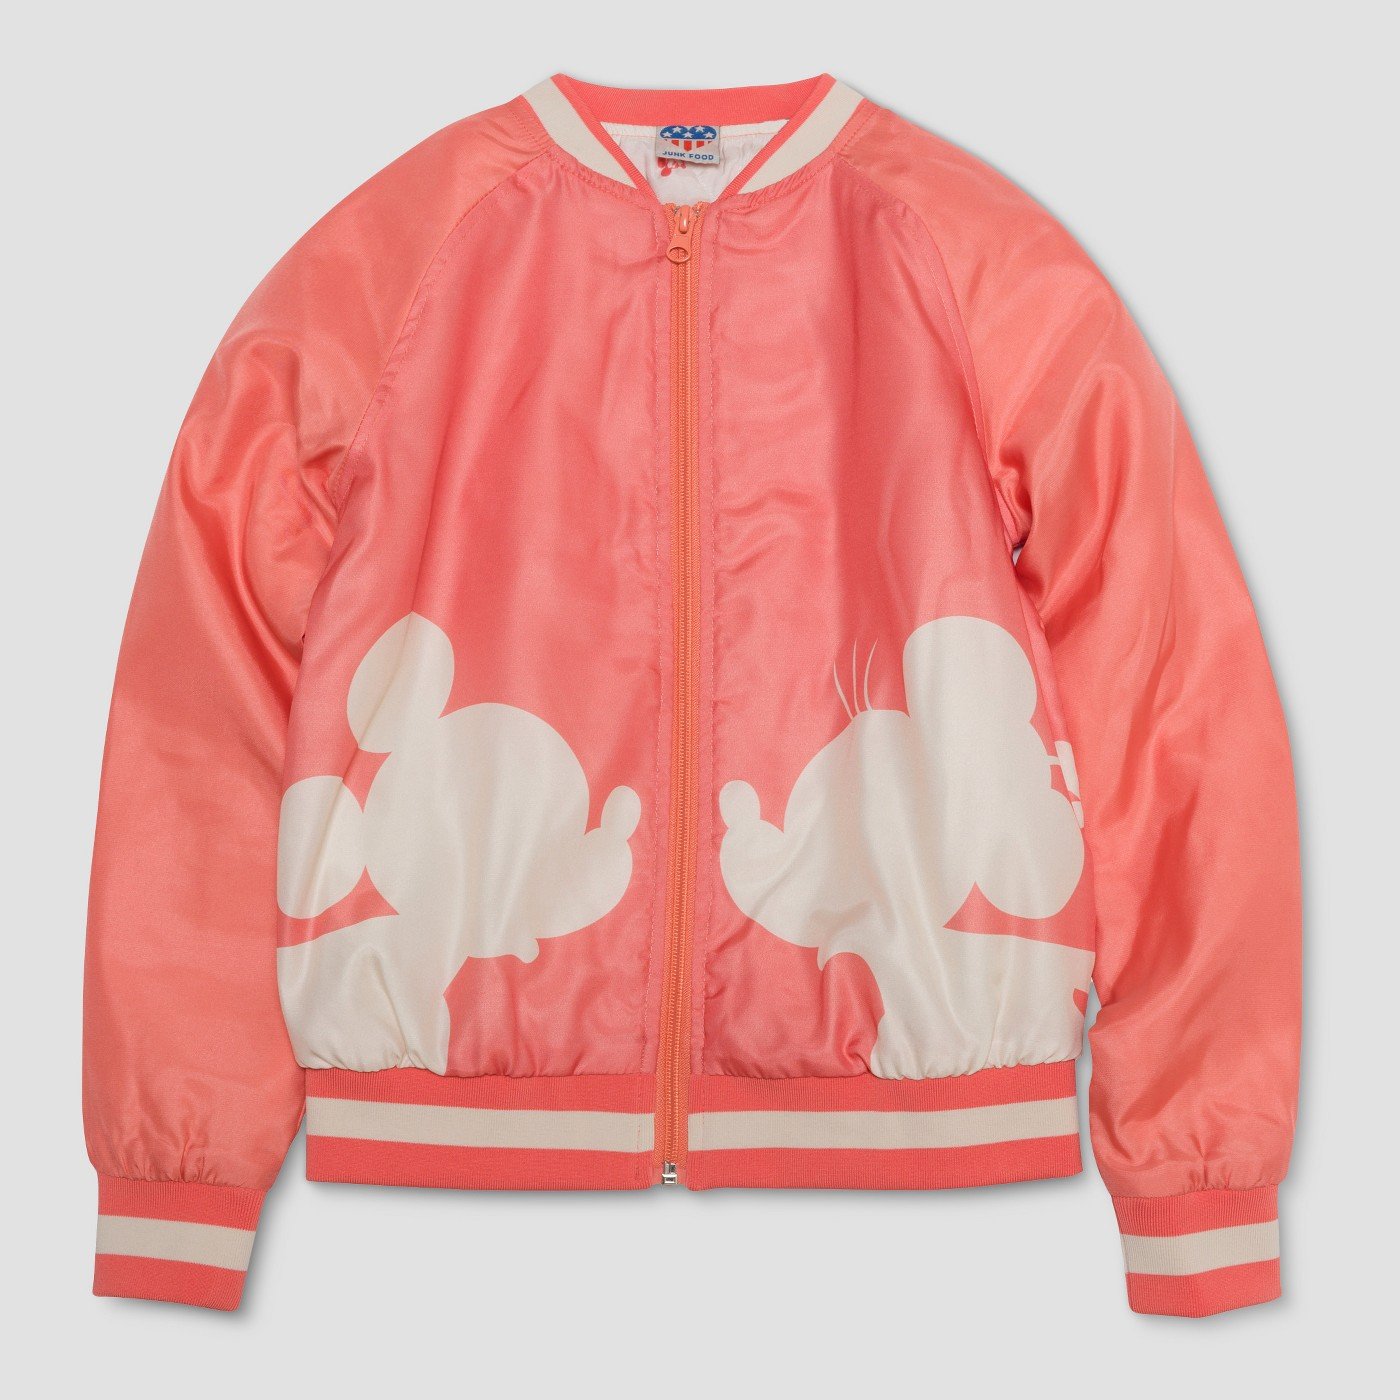 Mickey Mouse Bomber - Junk Food